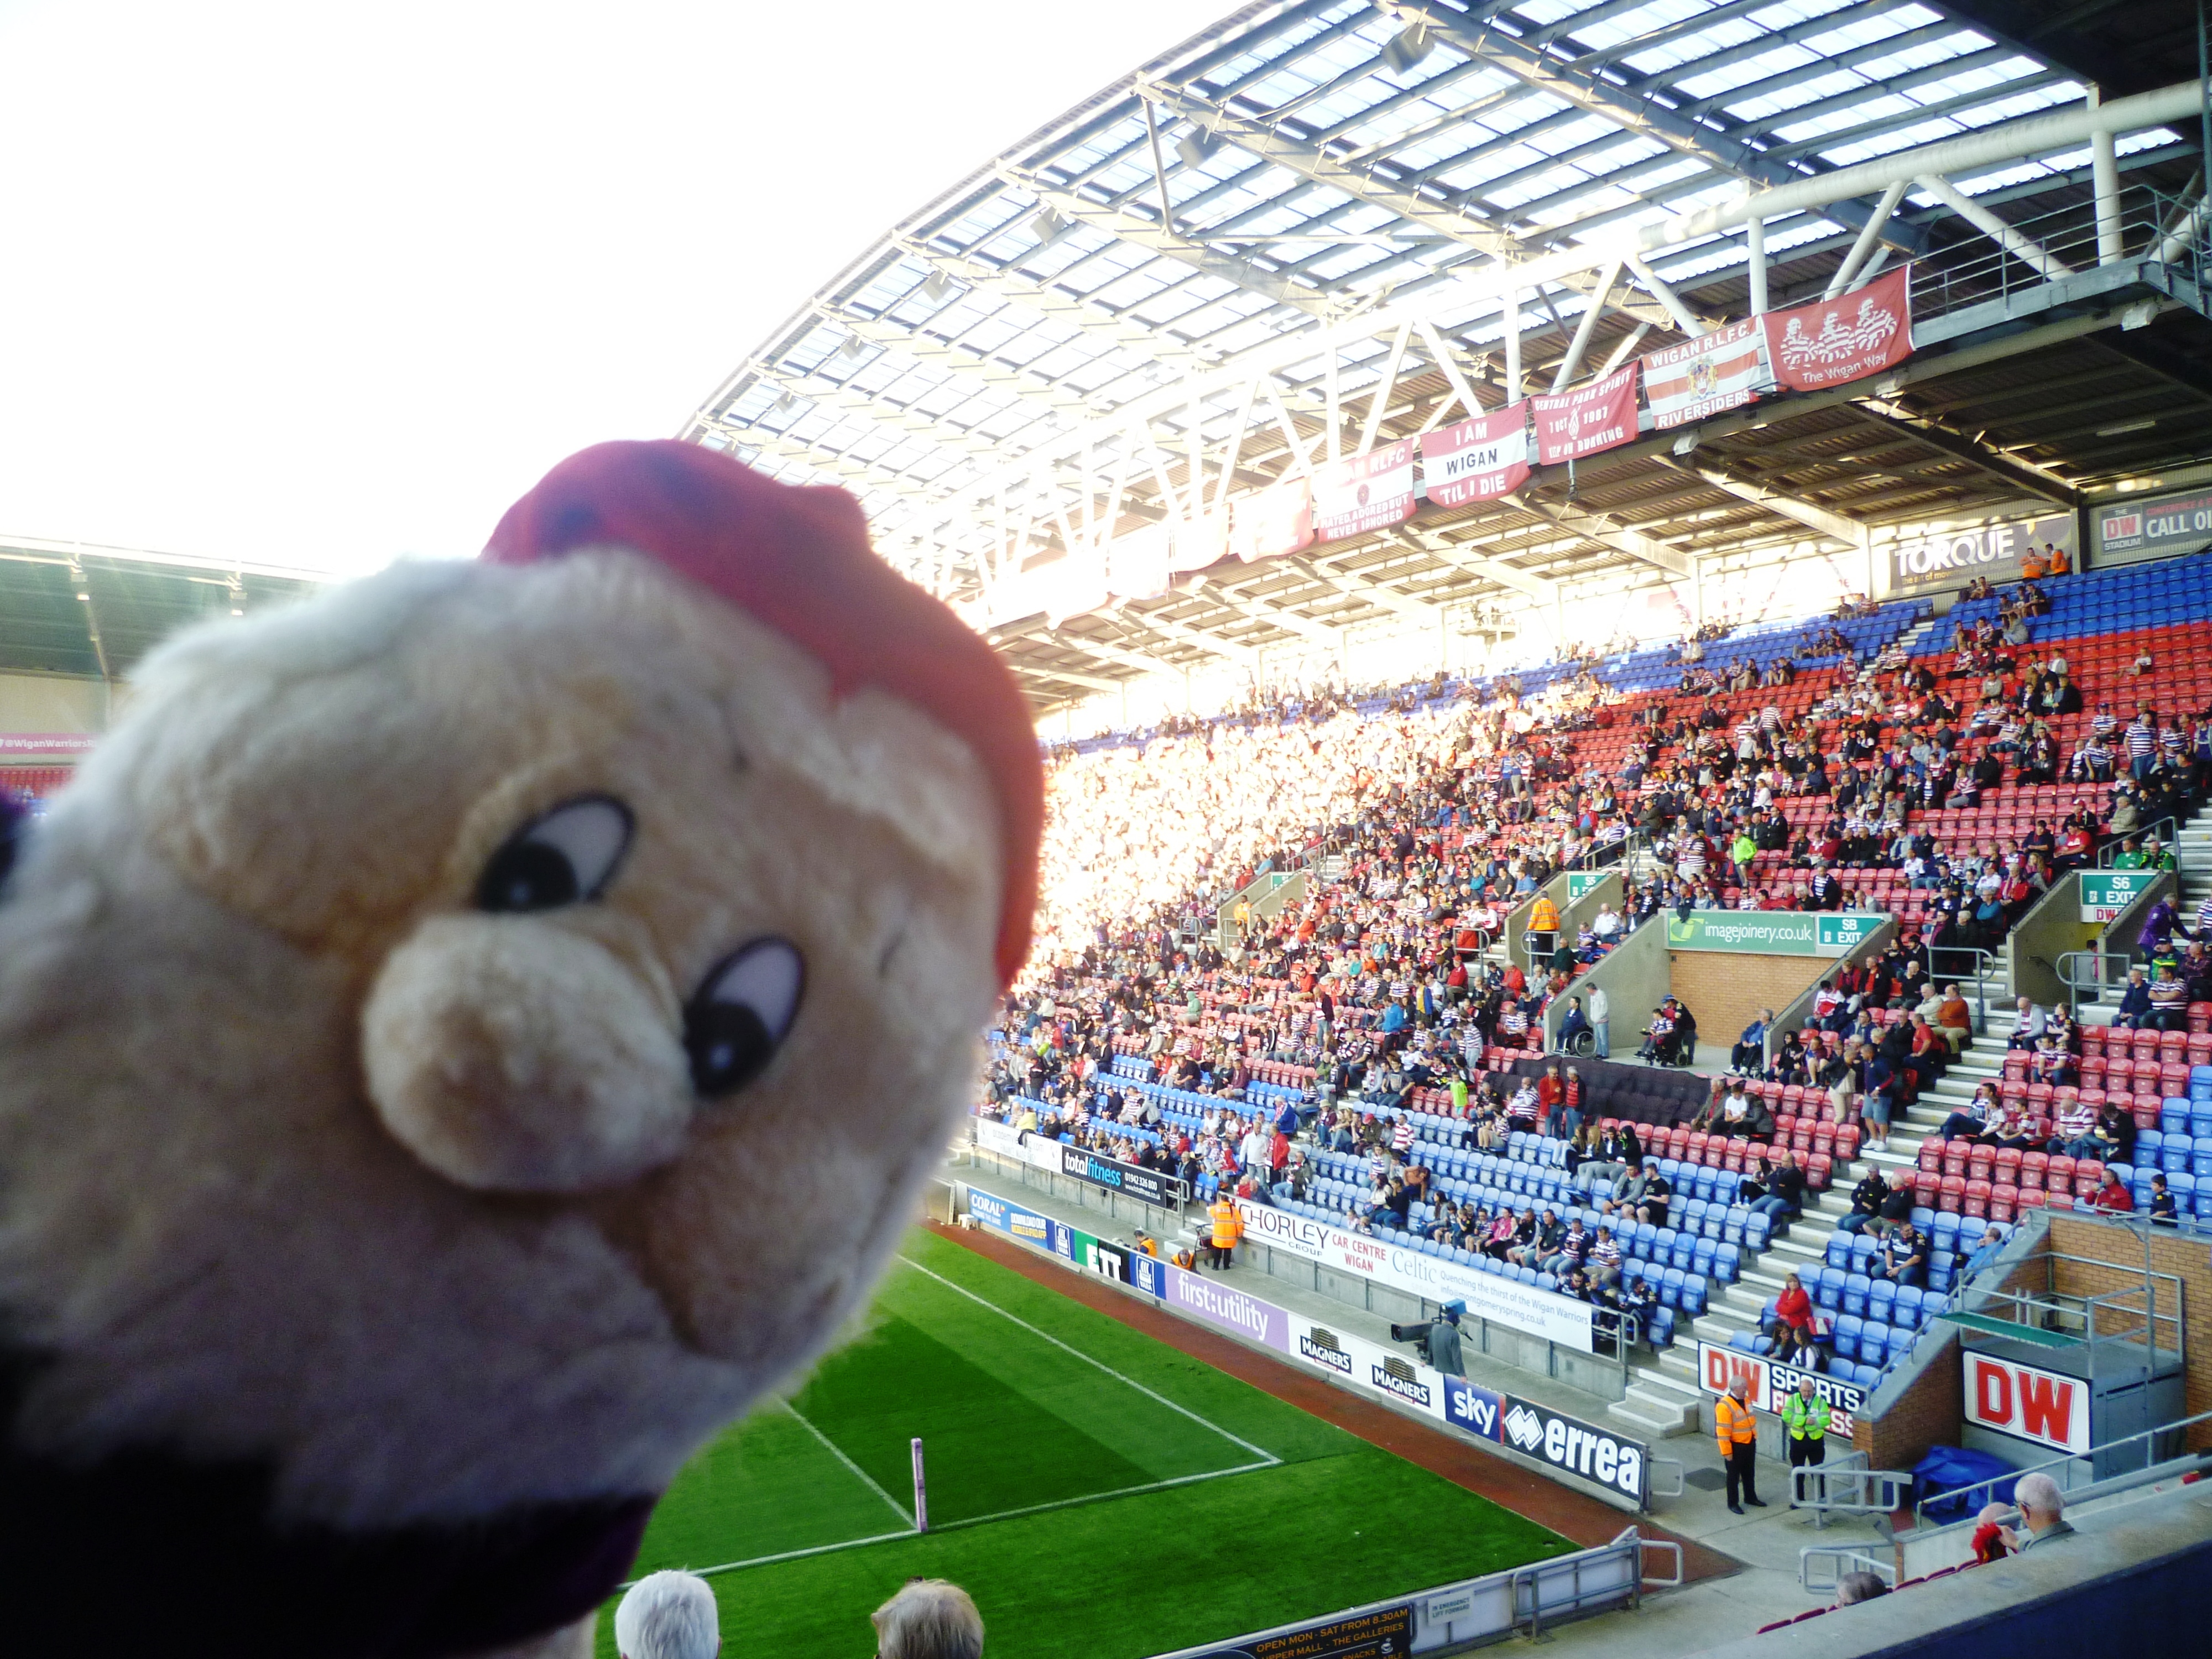 18. Come on Wigan!